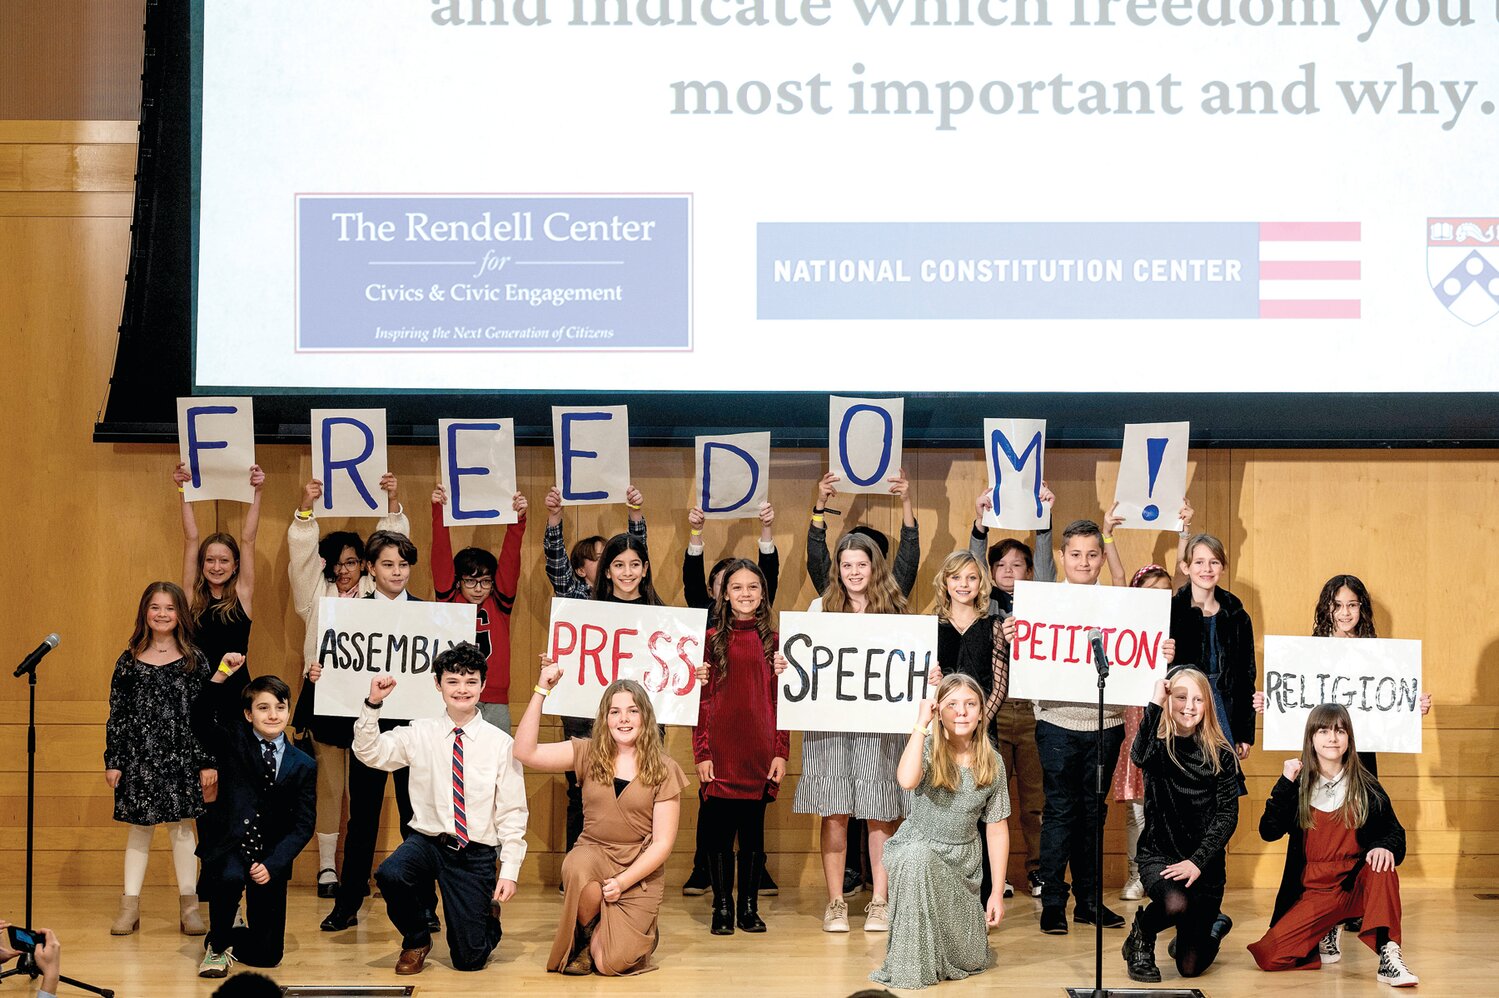 Buckingham Elementy School fifth graders participate in the Rendell Center Citizenship Challenge at the National Constitution Center on Jan. 18.